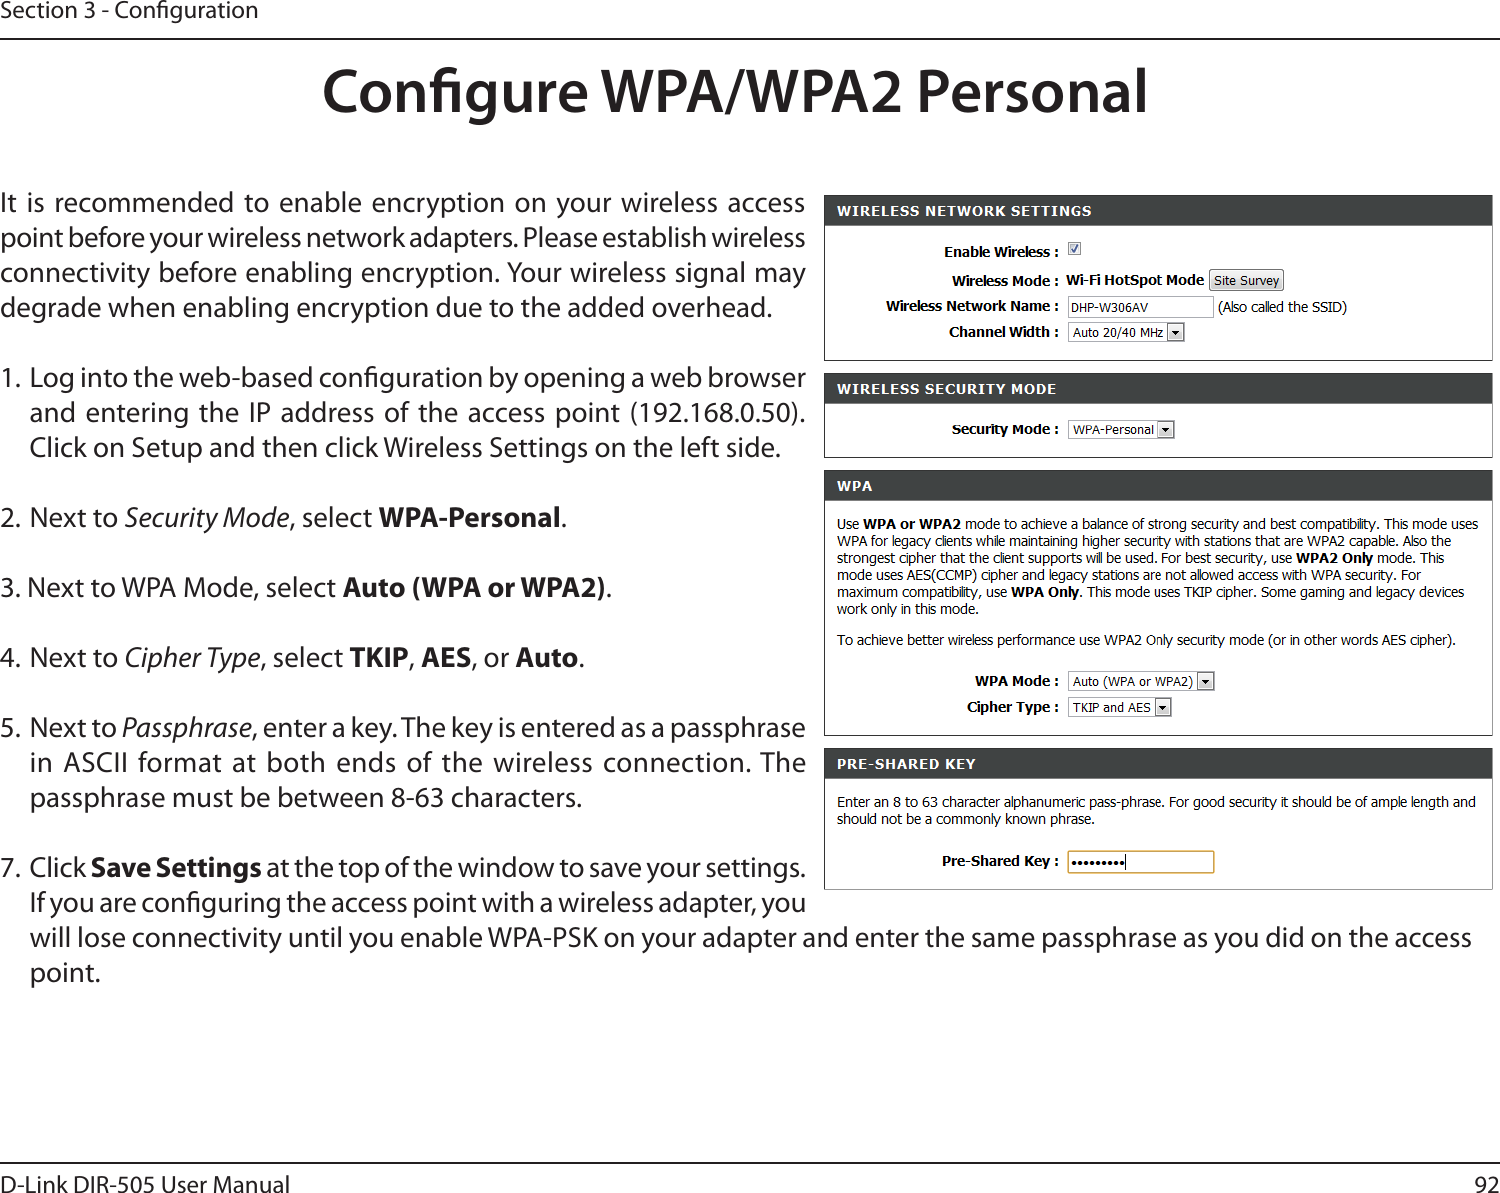 92D-Link DIR-505 User ManualSection 3 - CongurationCongure WPA/WPA2 PersonalIt  is recommended to enable  encryption on your wireless access point before your wireless network adapters. Please establish wireless connectivity before enabling encryption. Your wireless signal may degrade when enabling encryption due to the added overhead.1. Log into the web-based conguration by opening a web browser and entering the IP  address of  the access point (192.168.0.50).  Click on Setup and then click Wireless Settings on the left side.2. Next to Security Mode, select WPA-Personal.3. Next to WPA Mode, select Auto (WPA or WPA2).4. Next to Cipher Type, select TKIP, AES, or Auto.5. Next to Passphrase, enter a key. The key is entered as a passphrase in ASCII format at both ends  of the wireless connection. The passphrase must be between 8-63 characters. 7. Click Save Settings at the top of the window to save your settings. If you are conguring the access point with a wireless adapter, you will lose connectivity until you enable WPA-PSK on your adapter and enter the same passphrase as you did on the access point.